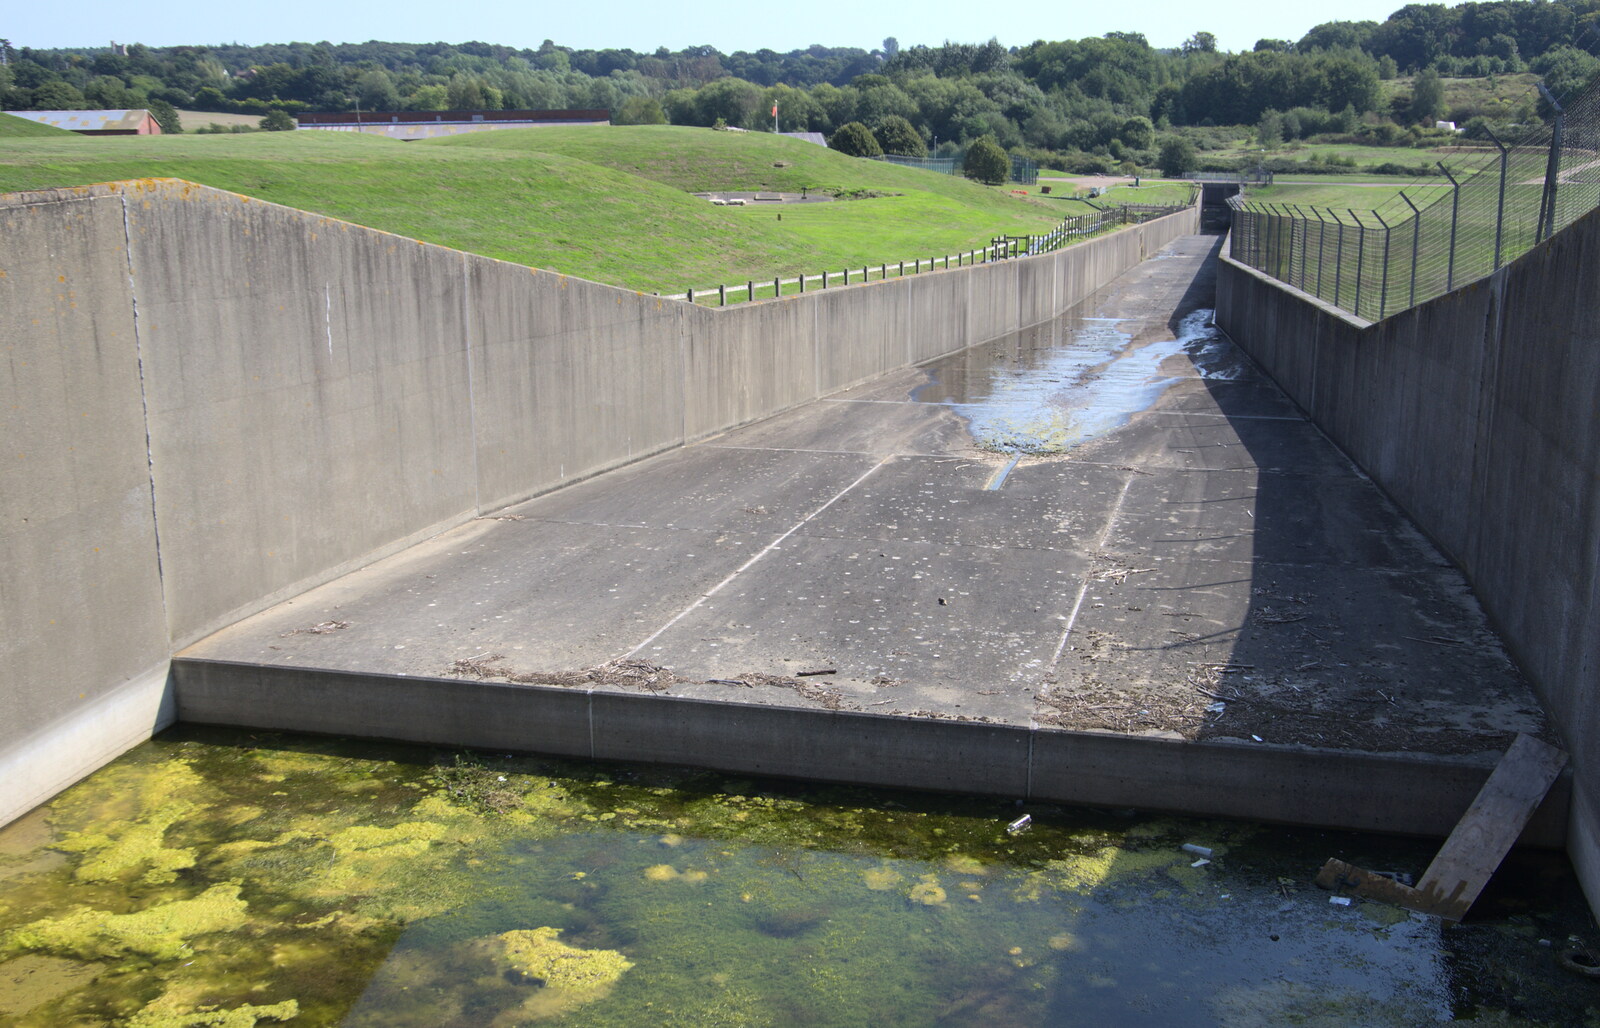 The resevoir overflow would be a fun waterslide from A Spot of Camping, Alton Water, Stutton, Suffolk - 1st September 2018